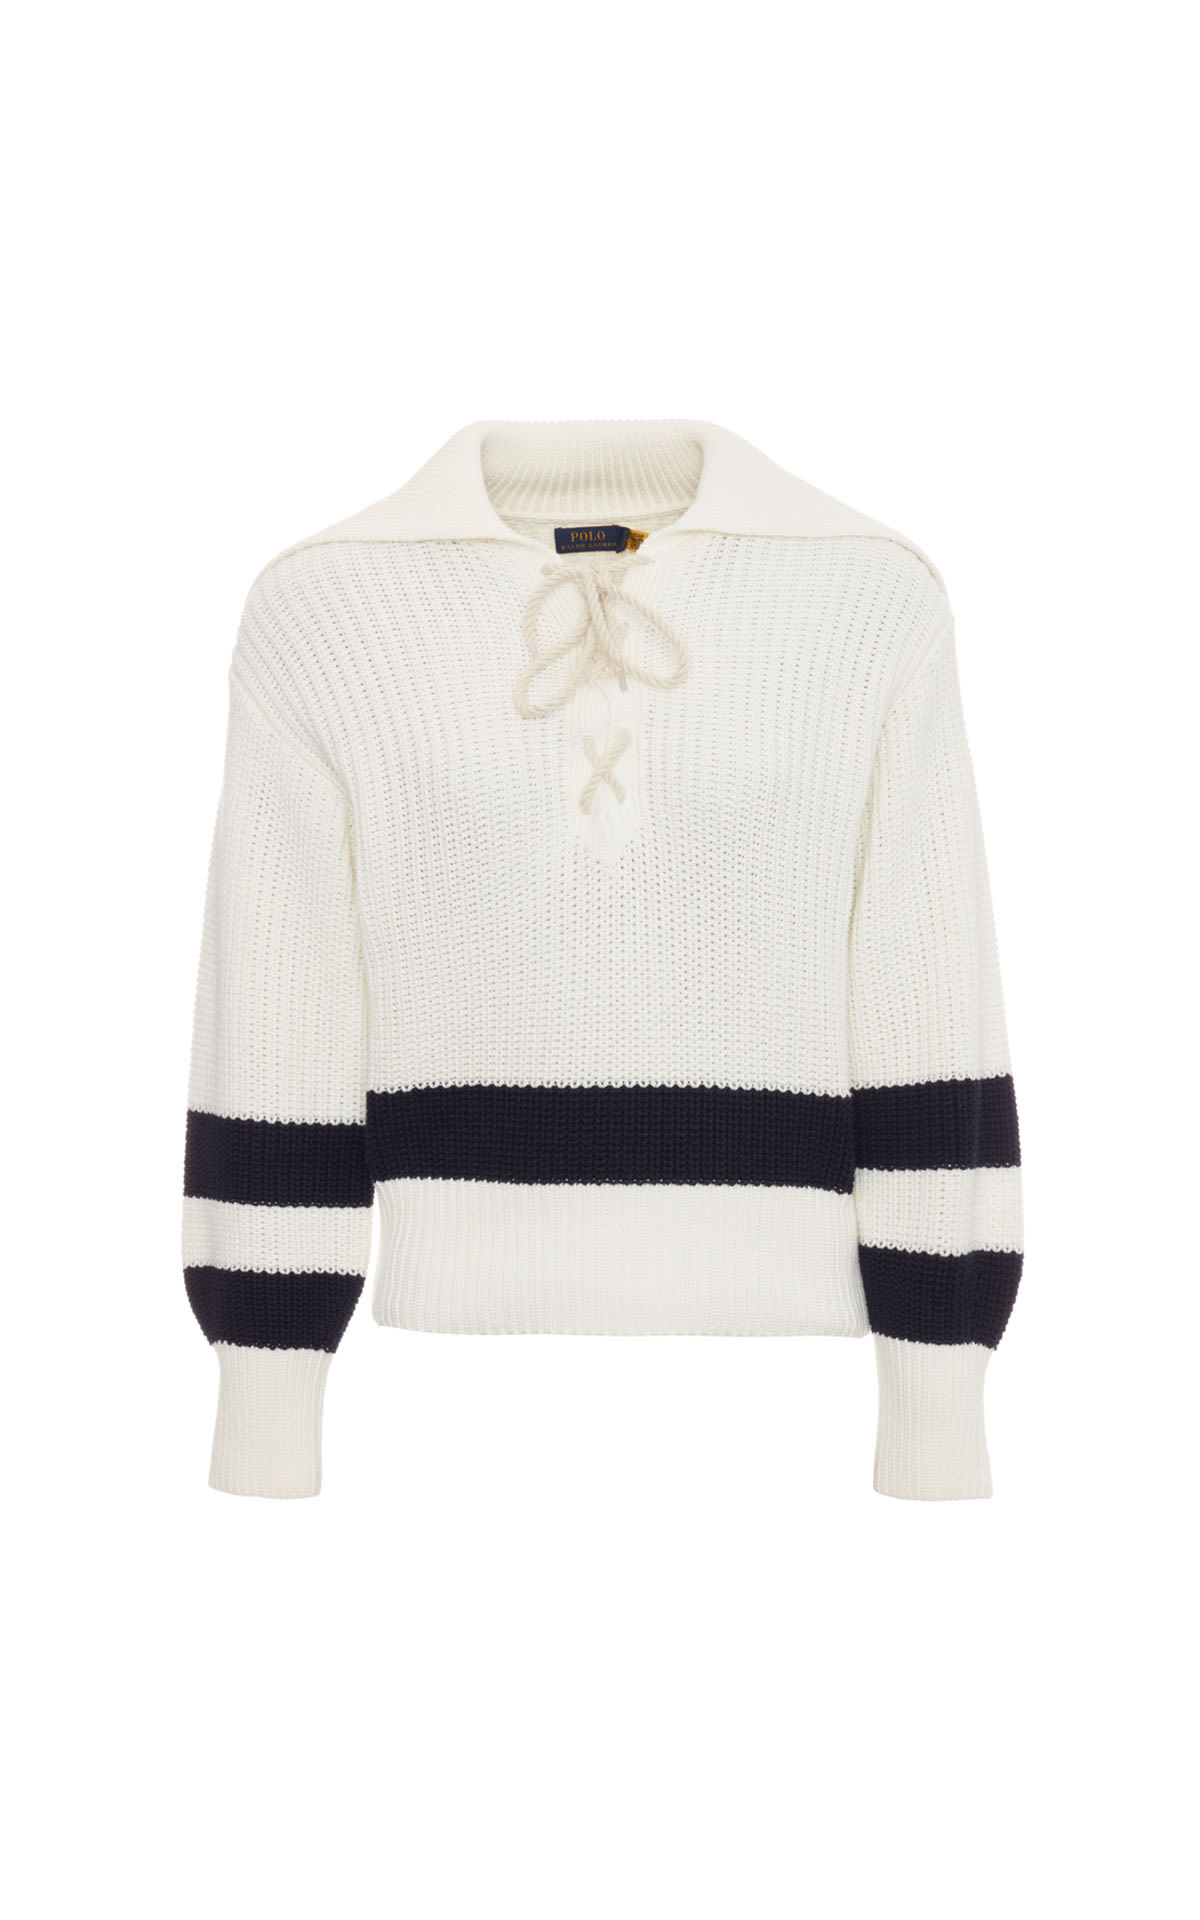 Polo Ralph Lauren Lace up sweater from Bicester Village